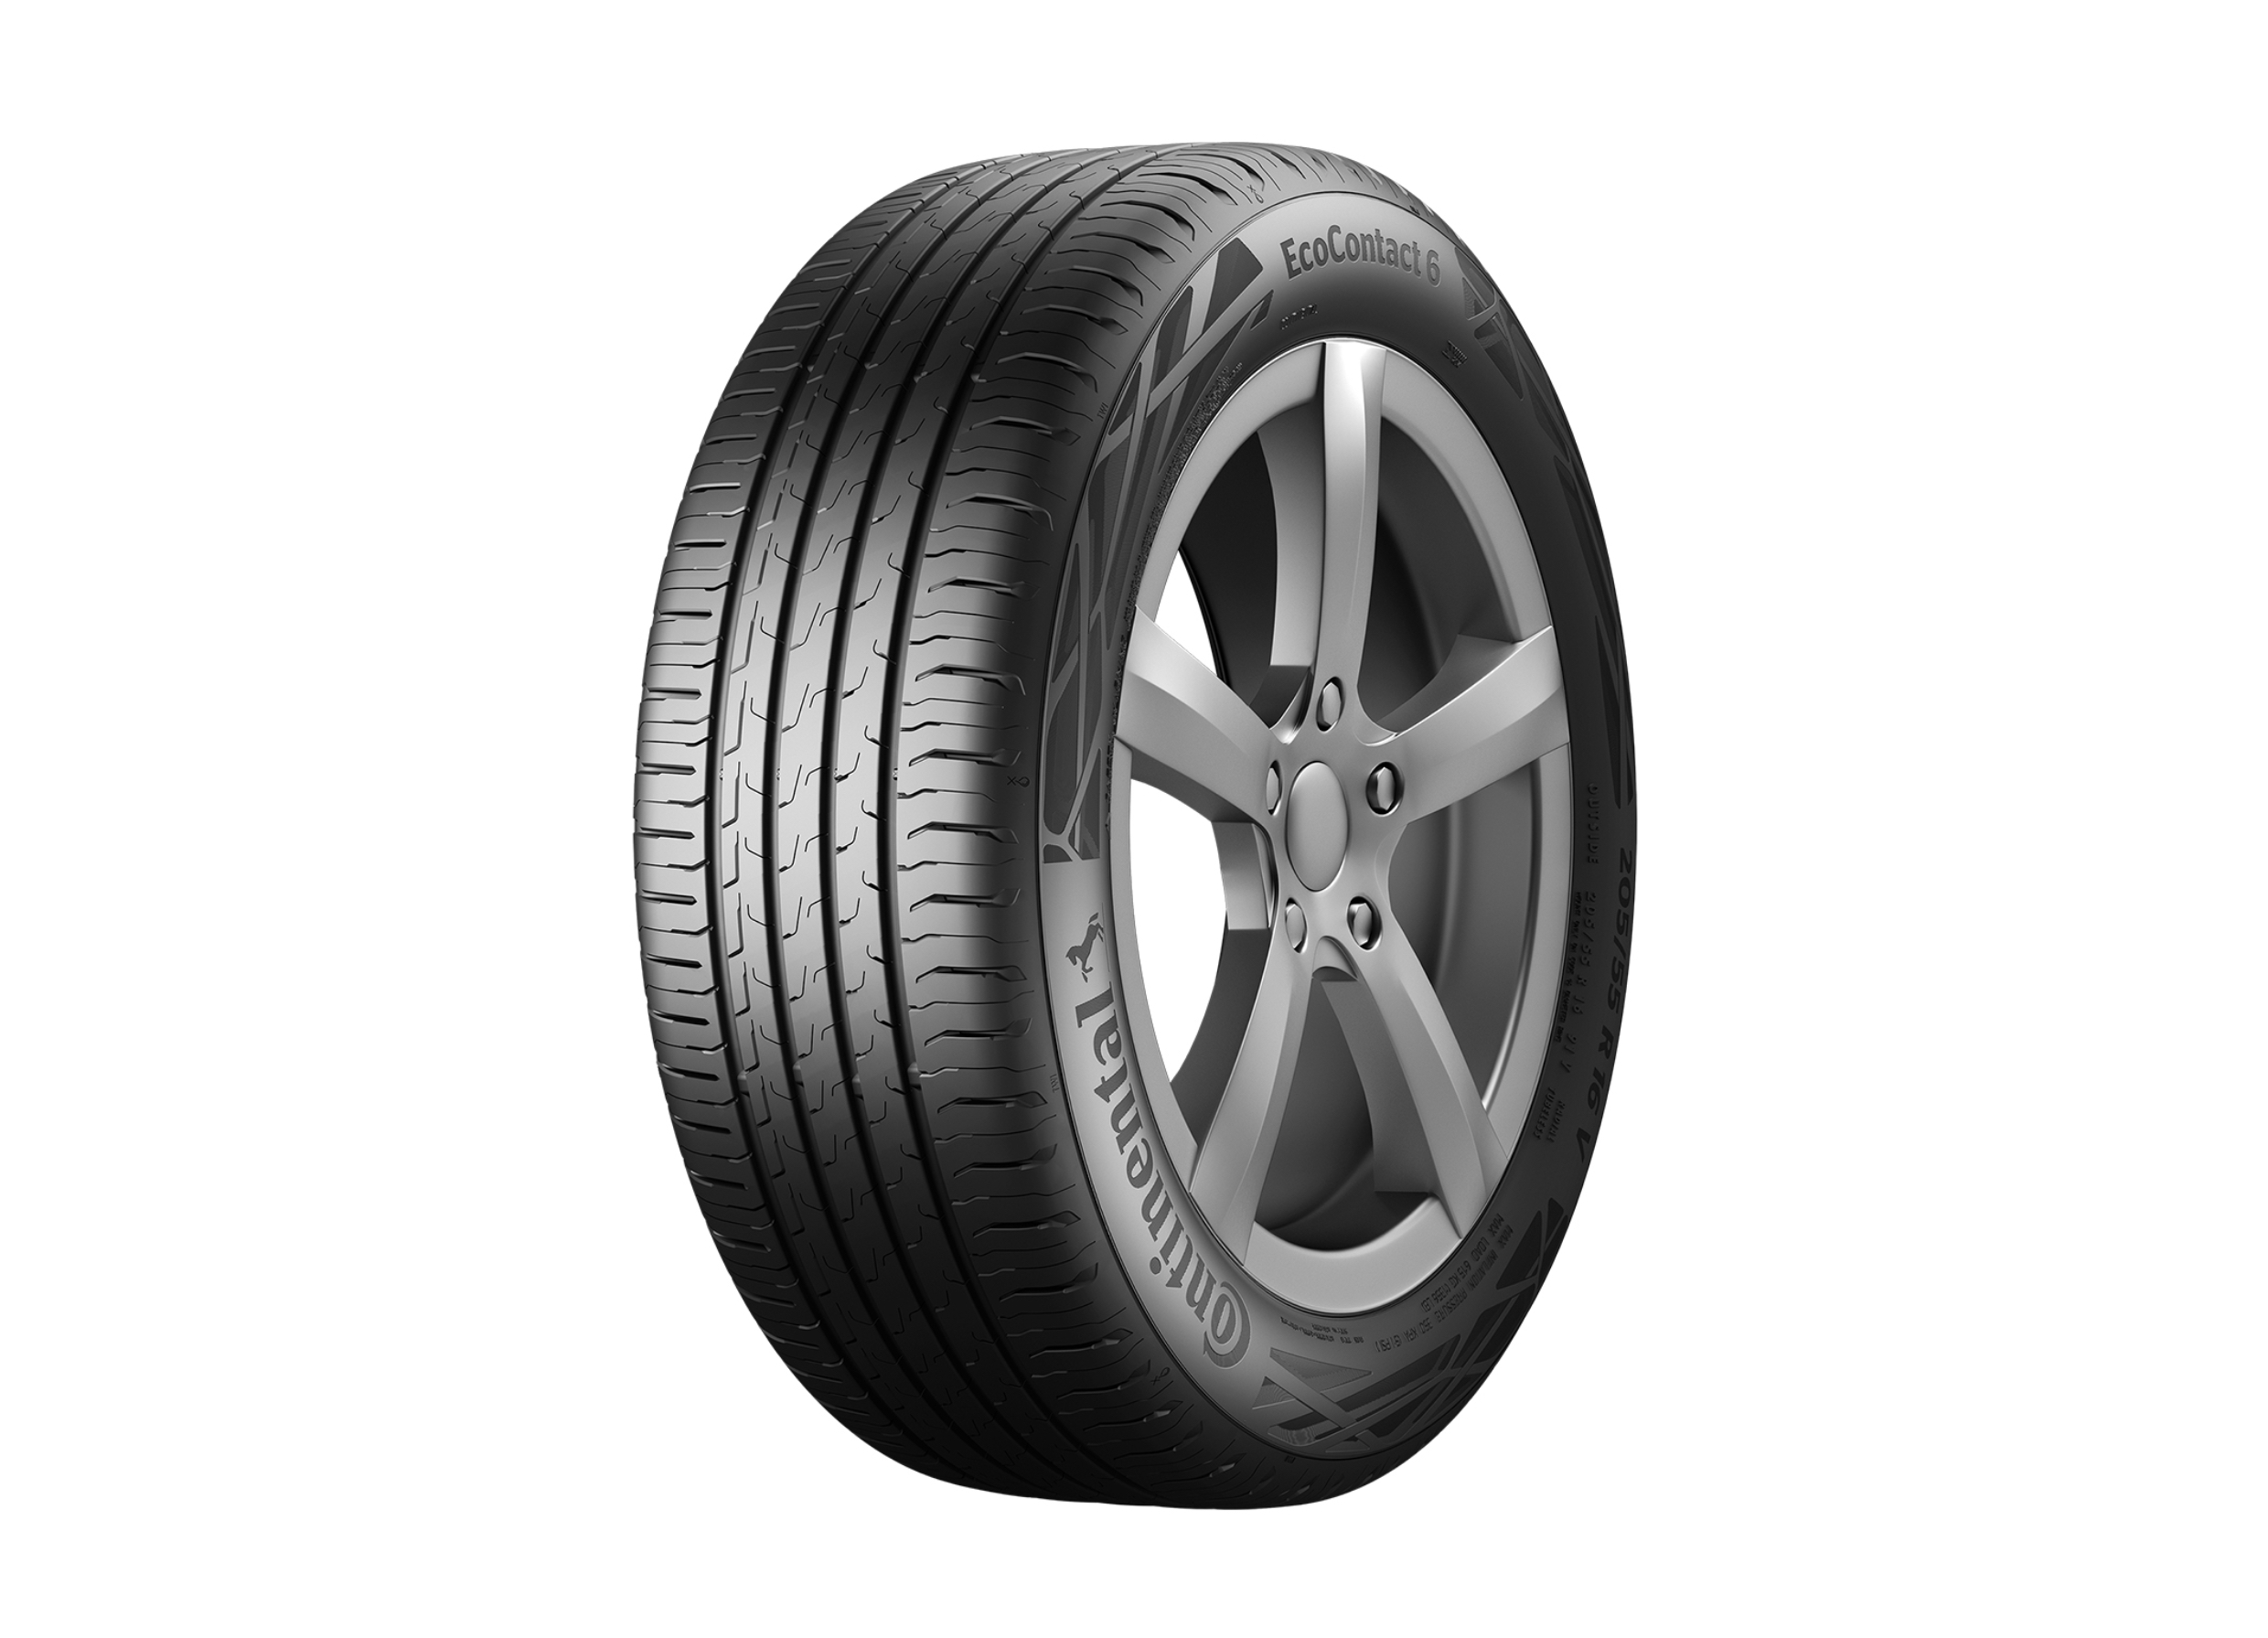 with throughout Now Polyester Recycled Continental Europe Bottles Tires Available PET - Continental AG from Made